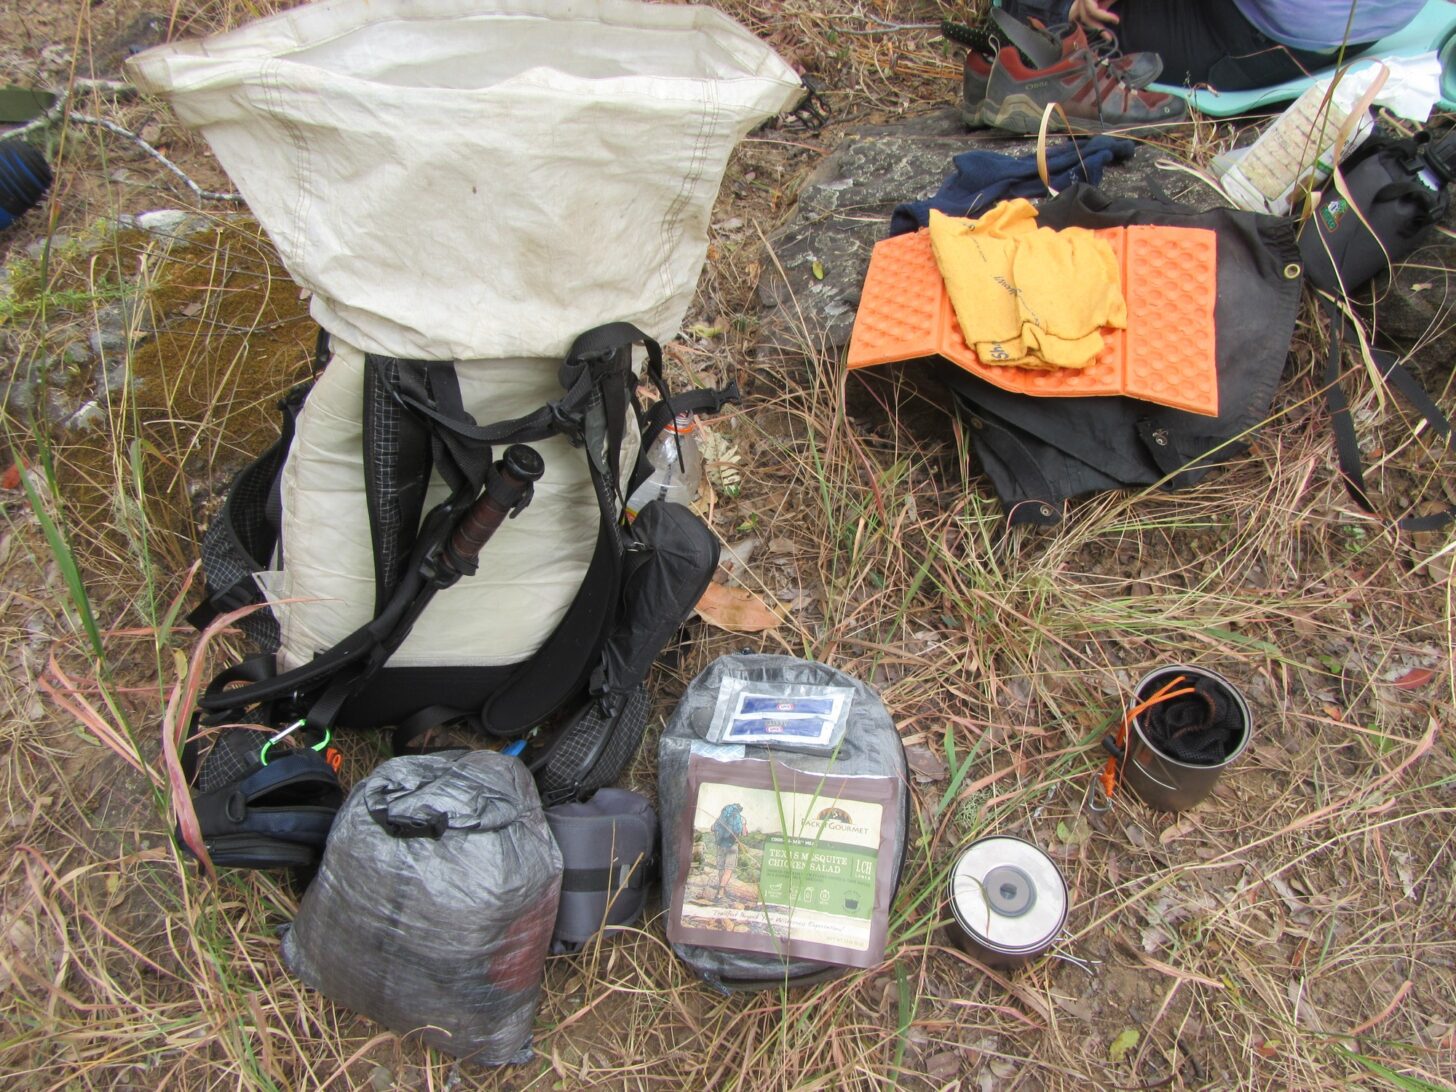 various ultralight backpacking gear spread out over the ground